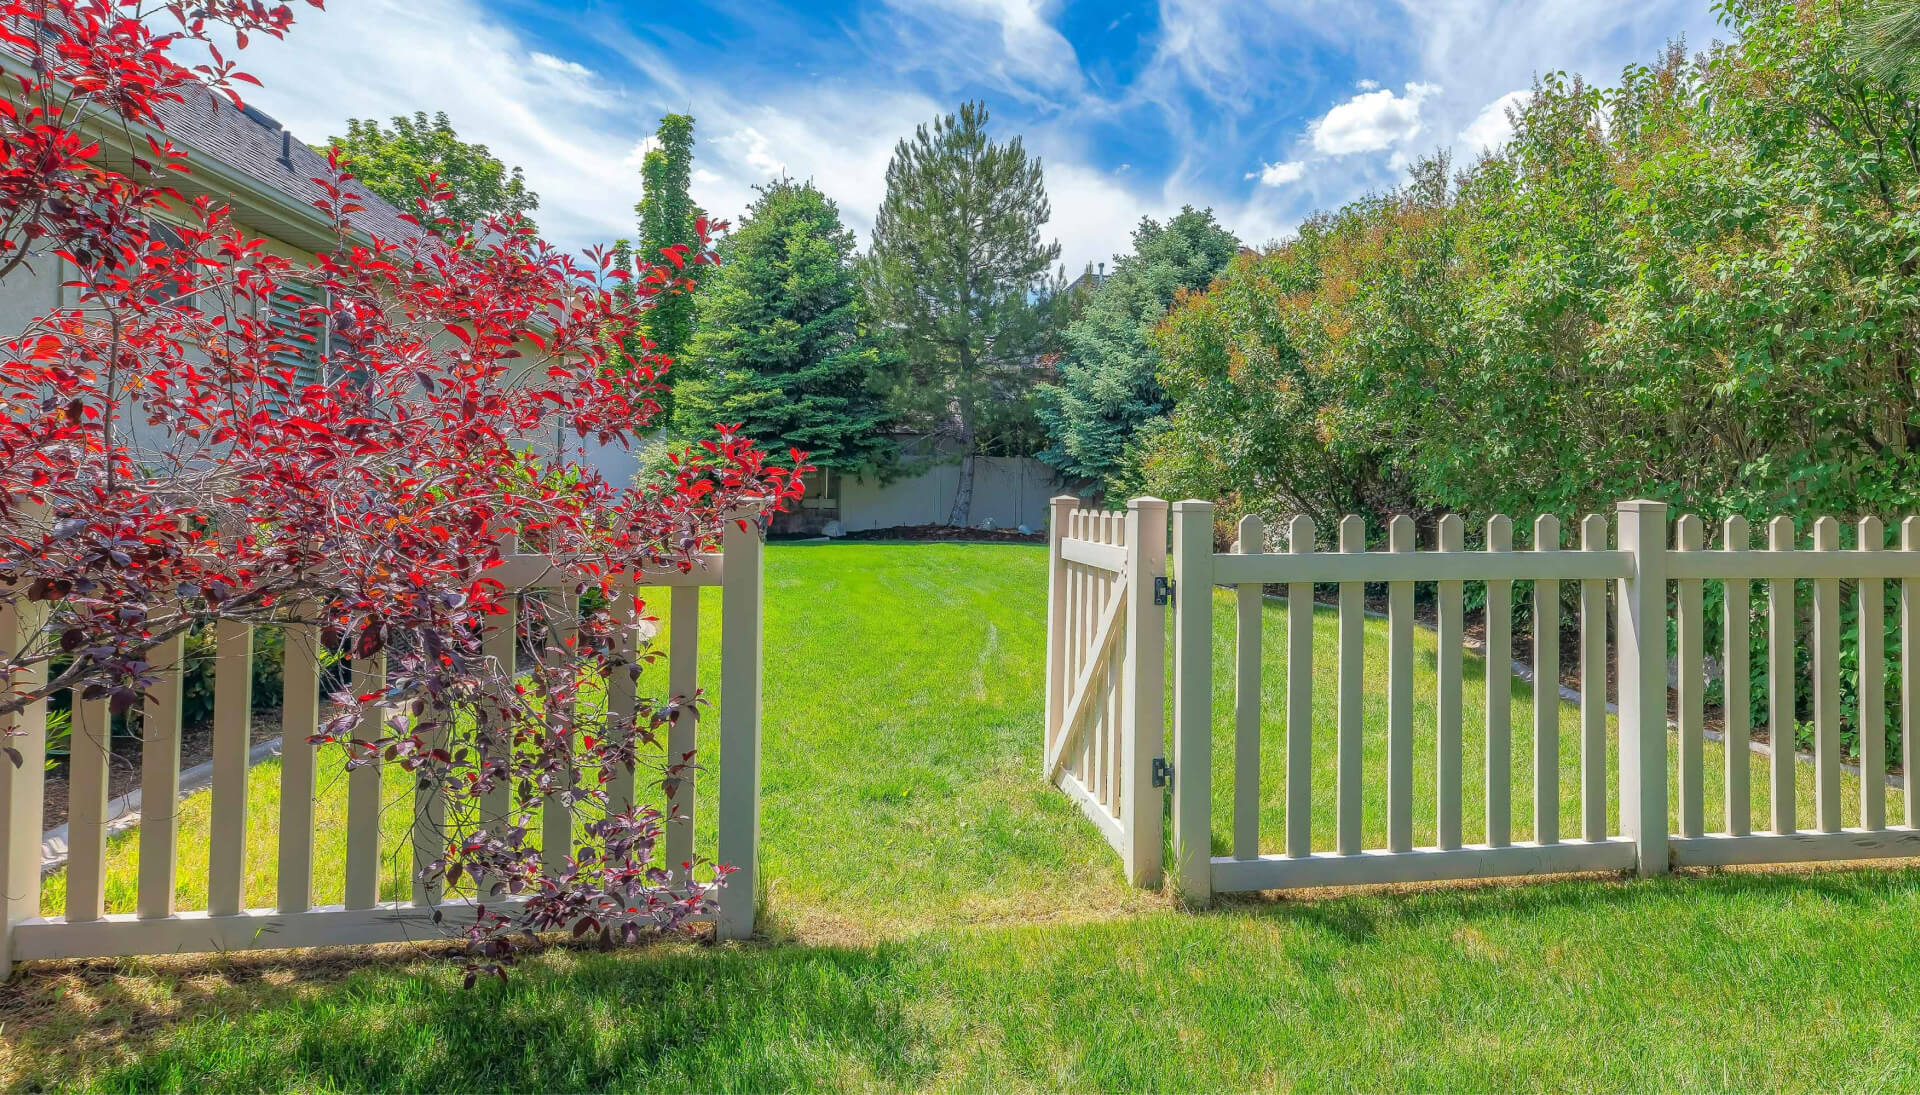 Fence gate installation services in Jackson